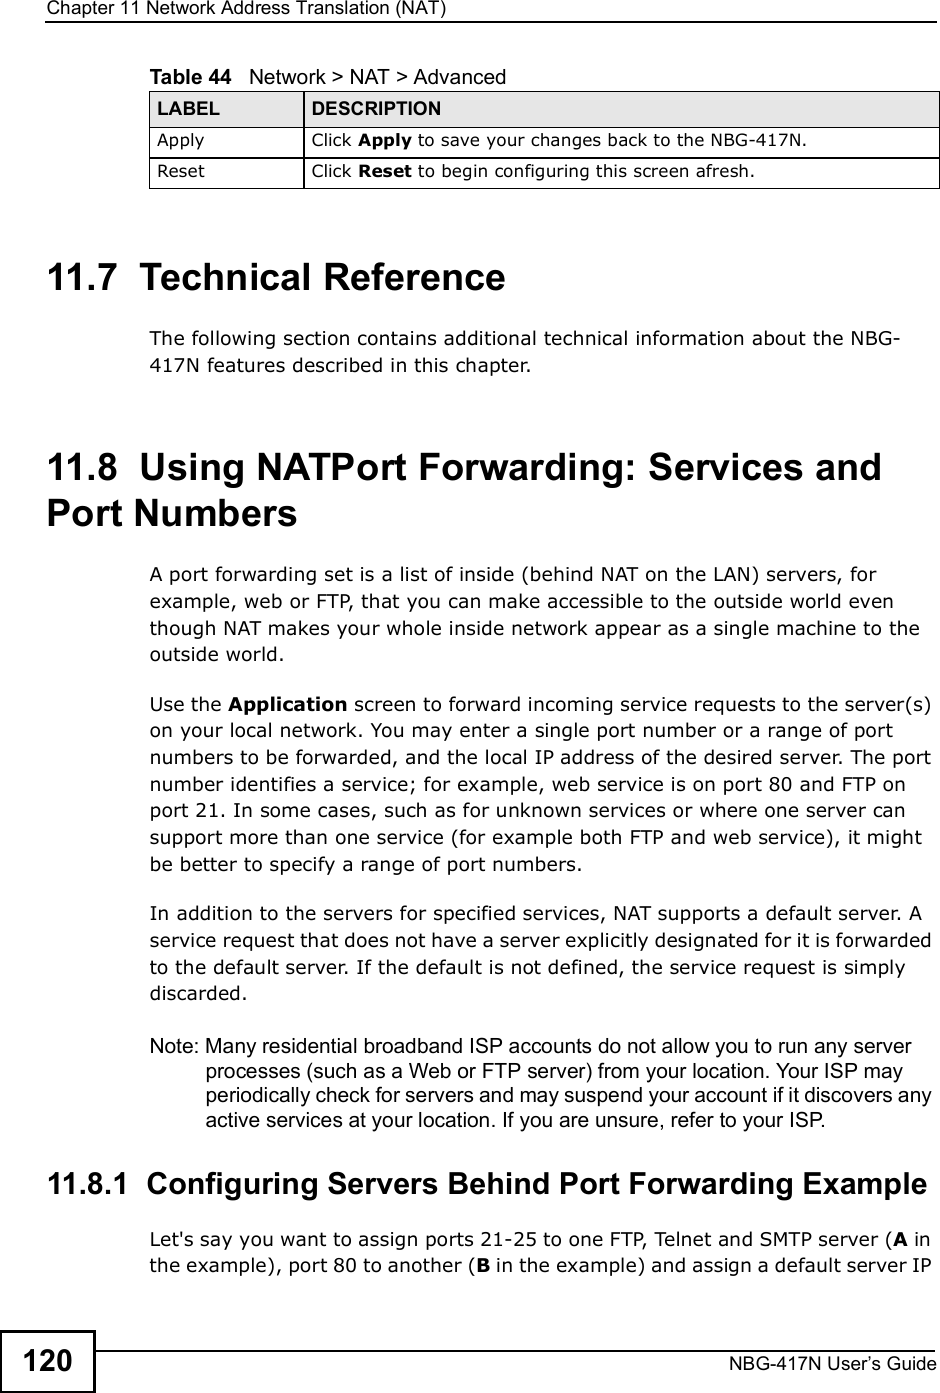 Chapter 11Network Address Translation (NAT)NBG-417N User s Guide12011.7  Technical ReferenceThe following section contains additional technical information about the NBG-417N features described in this chapter.11.8  Using NATPort Forwarding: Services and Port NumbersA port forwarding set is a list of inside (behind NAT on the LAN) servers, for example, web or FTP, that you can make accessible to the outside world even though NAT makes your whole inside network appear as a single machine to the outside world. Use the Application screen to forward incoming service requests to the server(s) on your local network. You may enter a single port number or a range of port numbers to be forwarded, and the local IP address of the desired server. The port number identifies a service; for example, web service is on port 80 and FTP on port 21. In some cases, such as for unknown services or where one server can support more than one service (for example both FTP and web service), it might be better to specify a range of port numbers.In addition to the servers for specified services, NAT supports a default server. A service request that does not have a server explicitly designated for it is forwarded to the default server. If the default is not defined, the service request is simply discarded.Note: Many residential broadband ISP accounts do not allow you to run any server processes (such as a Web or FTP server) from your location. Your ISP may periodically check for servers and may suspend your account if it discovers any active services at your location. If you are unsure, refer to your ISP.11.8.1  Configuring Servers Behind Port Forwarding ExampleLet&apos;s say you want to assign ports 21-25 to one FTP, Telnet and SMTP server (A in the example), port 80 to another (B in the example) and assign a default server IP Apply Click Apply to save your changes back to the NBG-417N.Reset Click Reset to begin configuring this screen afresh.Table 44   Network &gt; NAT &gt; AdvancedLABEL DESCRIPTION